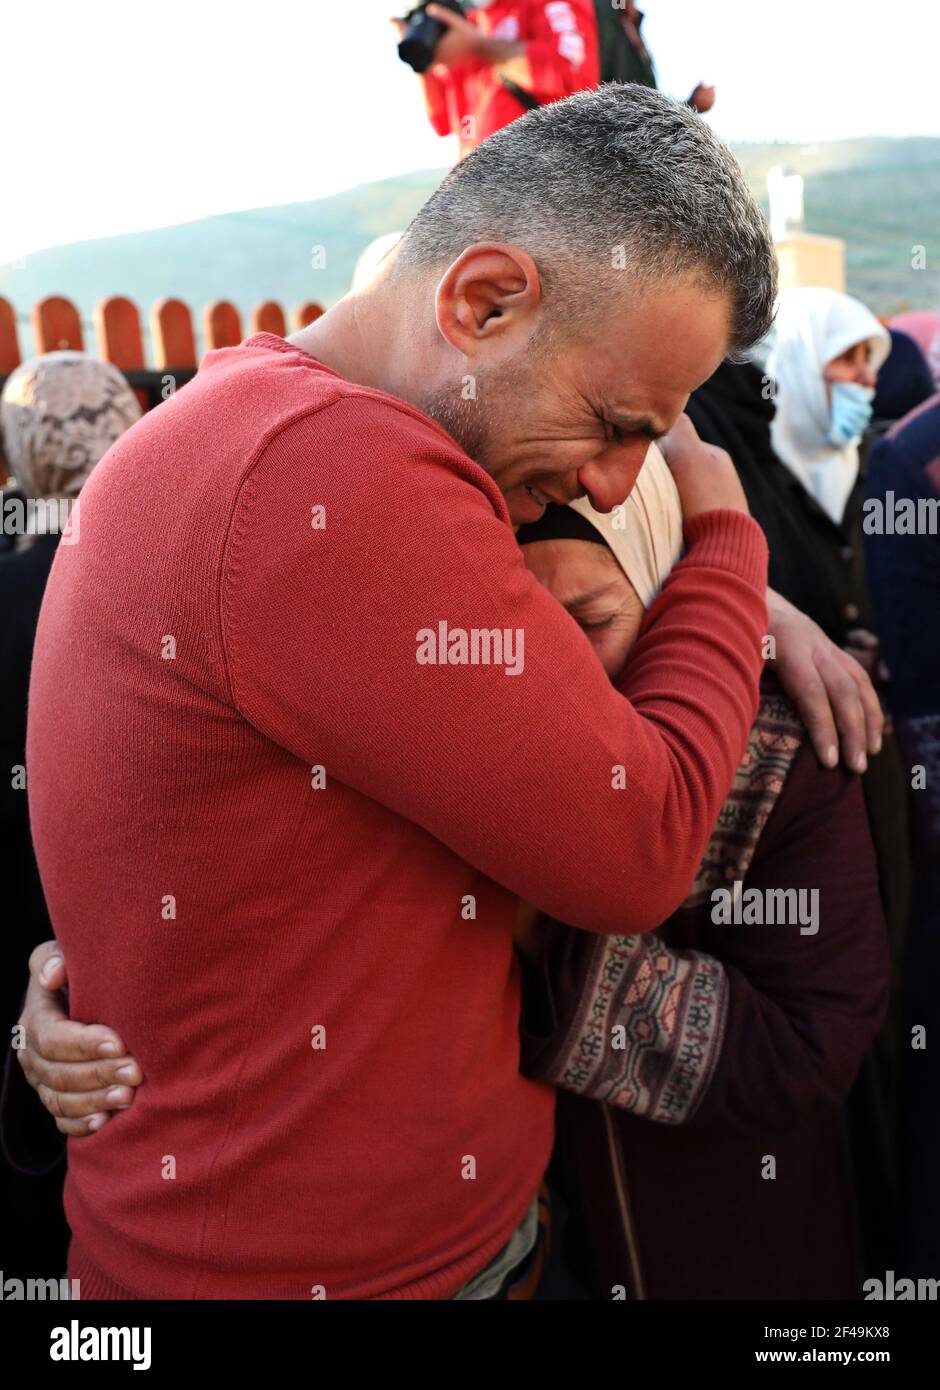 Nablus, Nablus. 19th Mar, 2021. Relatives of Palestinian Atef Yousef Hanaysha mourn during his funeral in the West Bank village of Beit Dajan, east of Nablus, on March 19, 2021. Atef Yousef Hanaysha was shot dead by Israeli soldiers on Friday afternoon in an anti-settlement rally near Beit Dajan village, medics said. Credit: Ayman Nobani/Xinhua/Alamy Live News Stock Photo